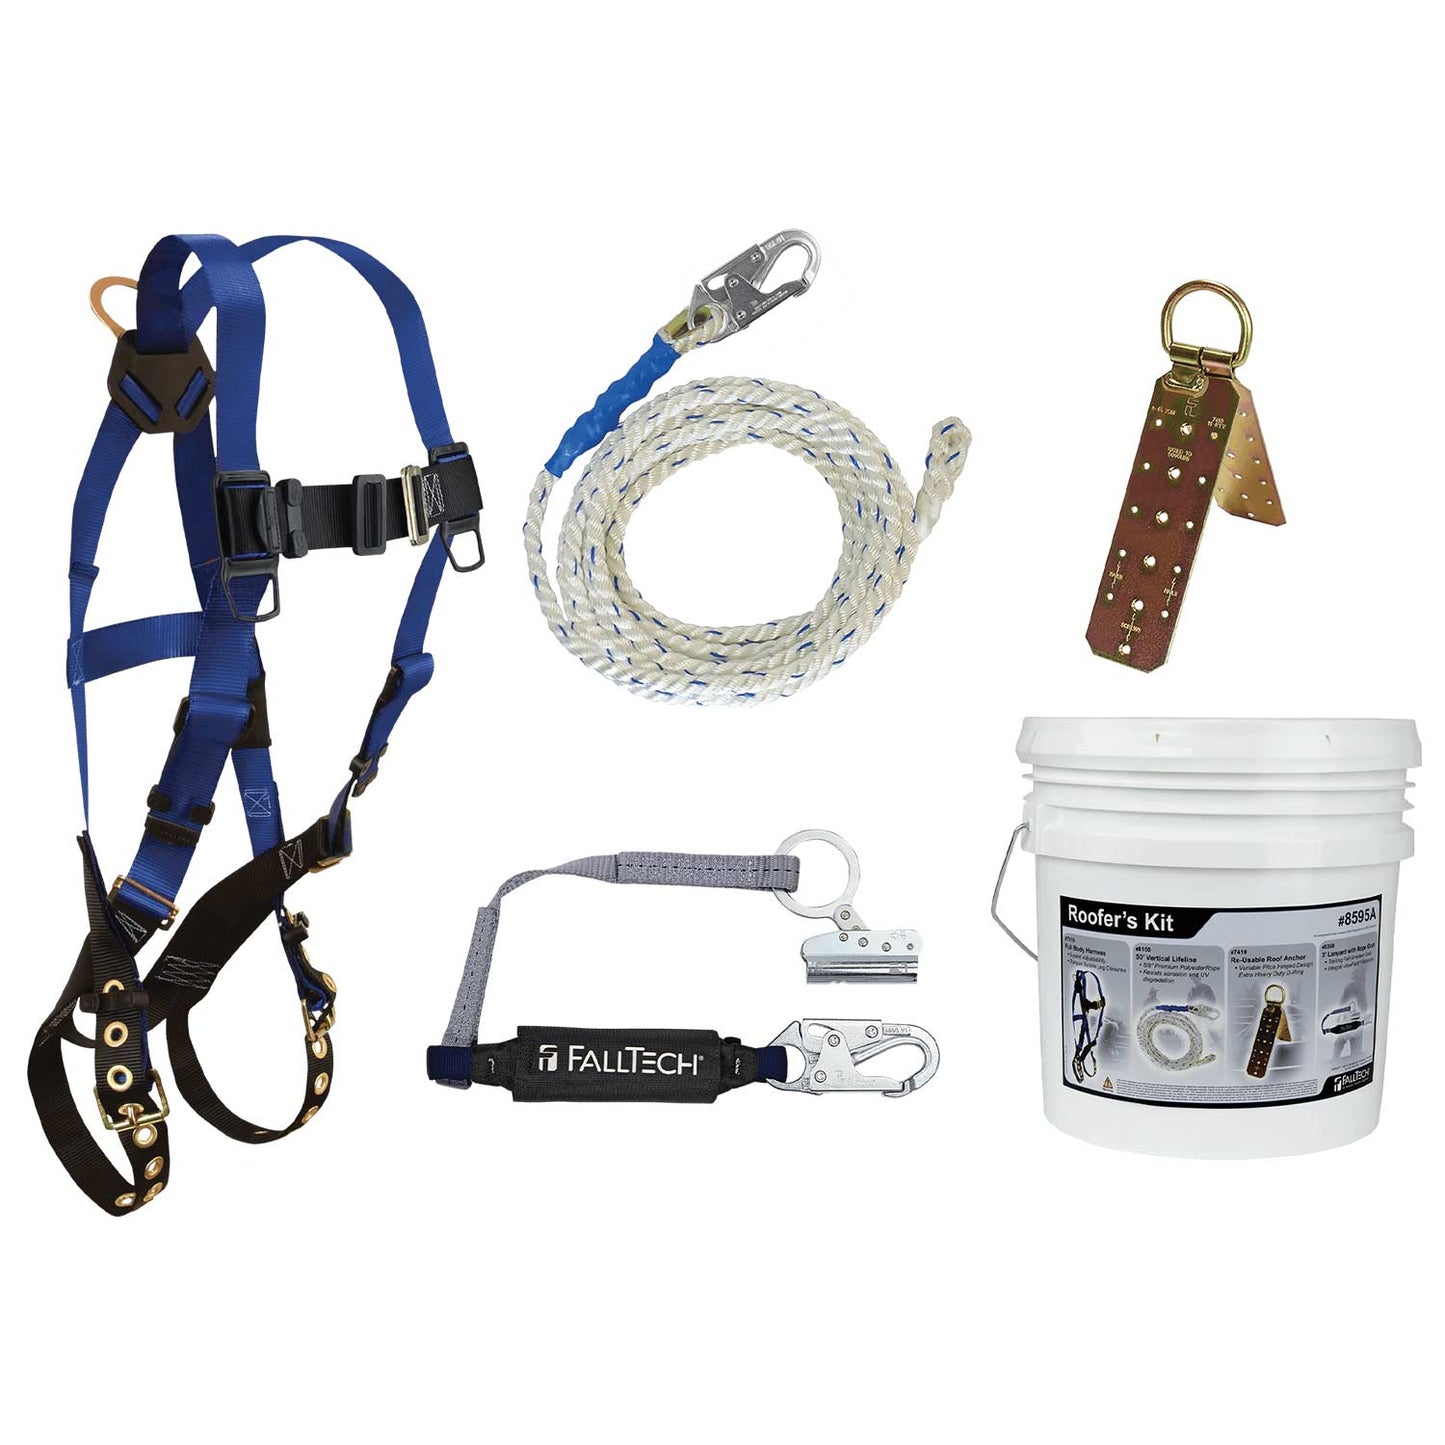 FallTech Roofing Fall Protection Kit with Harness | 8595A